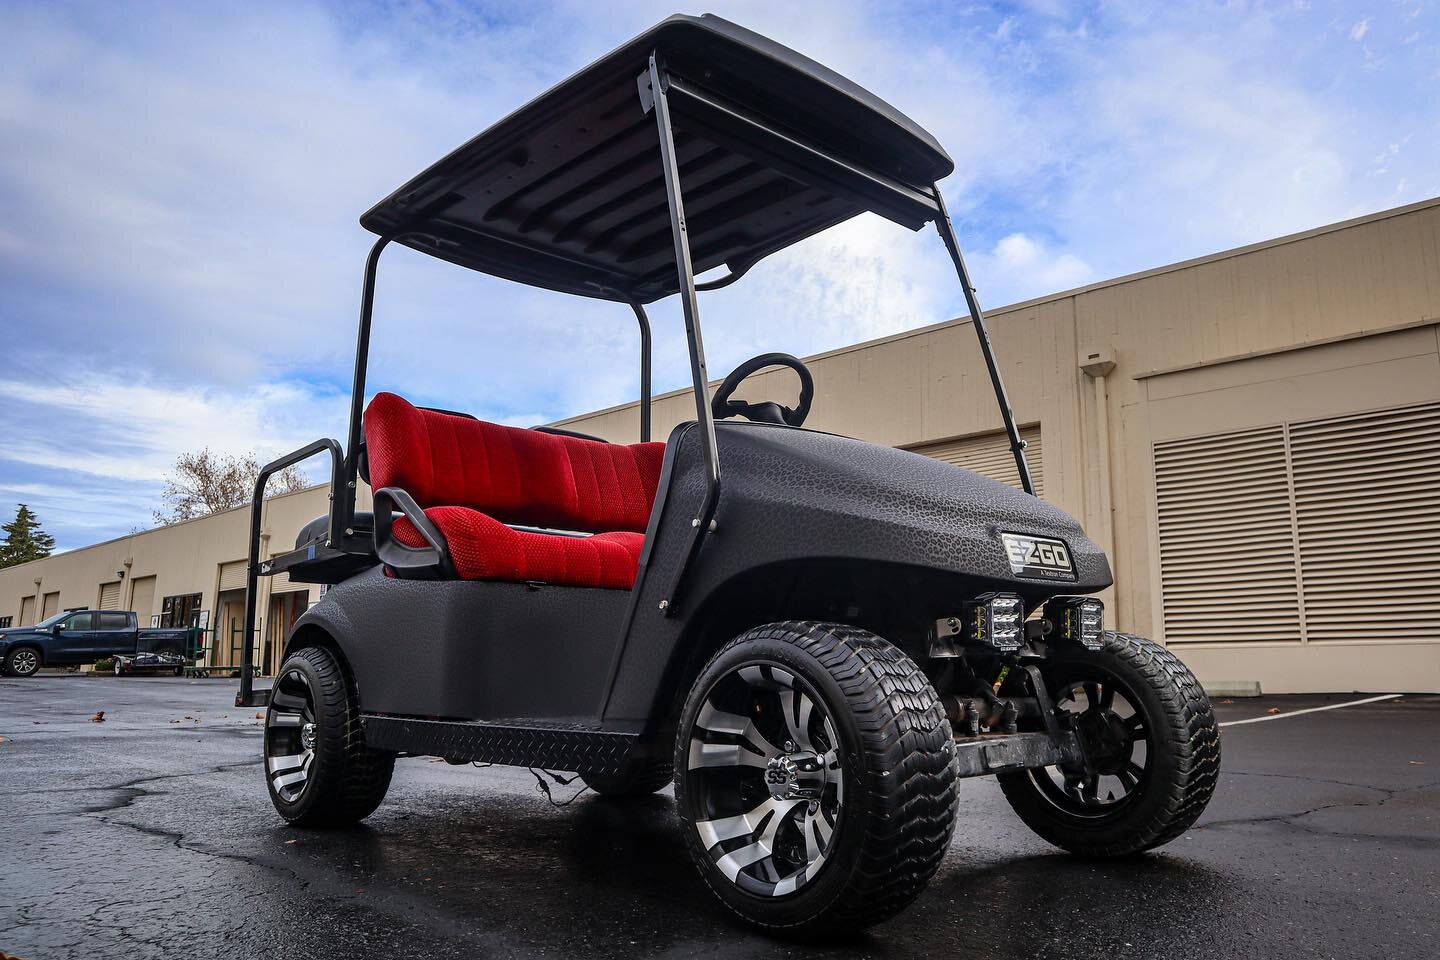 Imagine driving this at the golf course or just strolling around the block with it. This cart gives off the VIP ONLY EXPERIENCE! 🔥

Reach out to us if you&rsquo;d like to pimp your ride!
.
#driftwraps #sacramento #ranchocordova #folsom #smallbusines